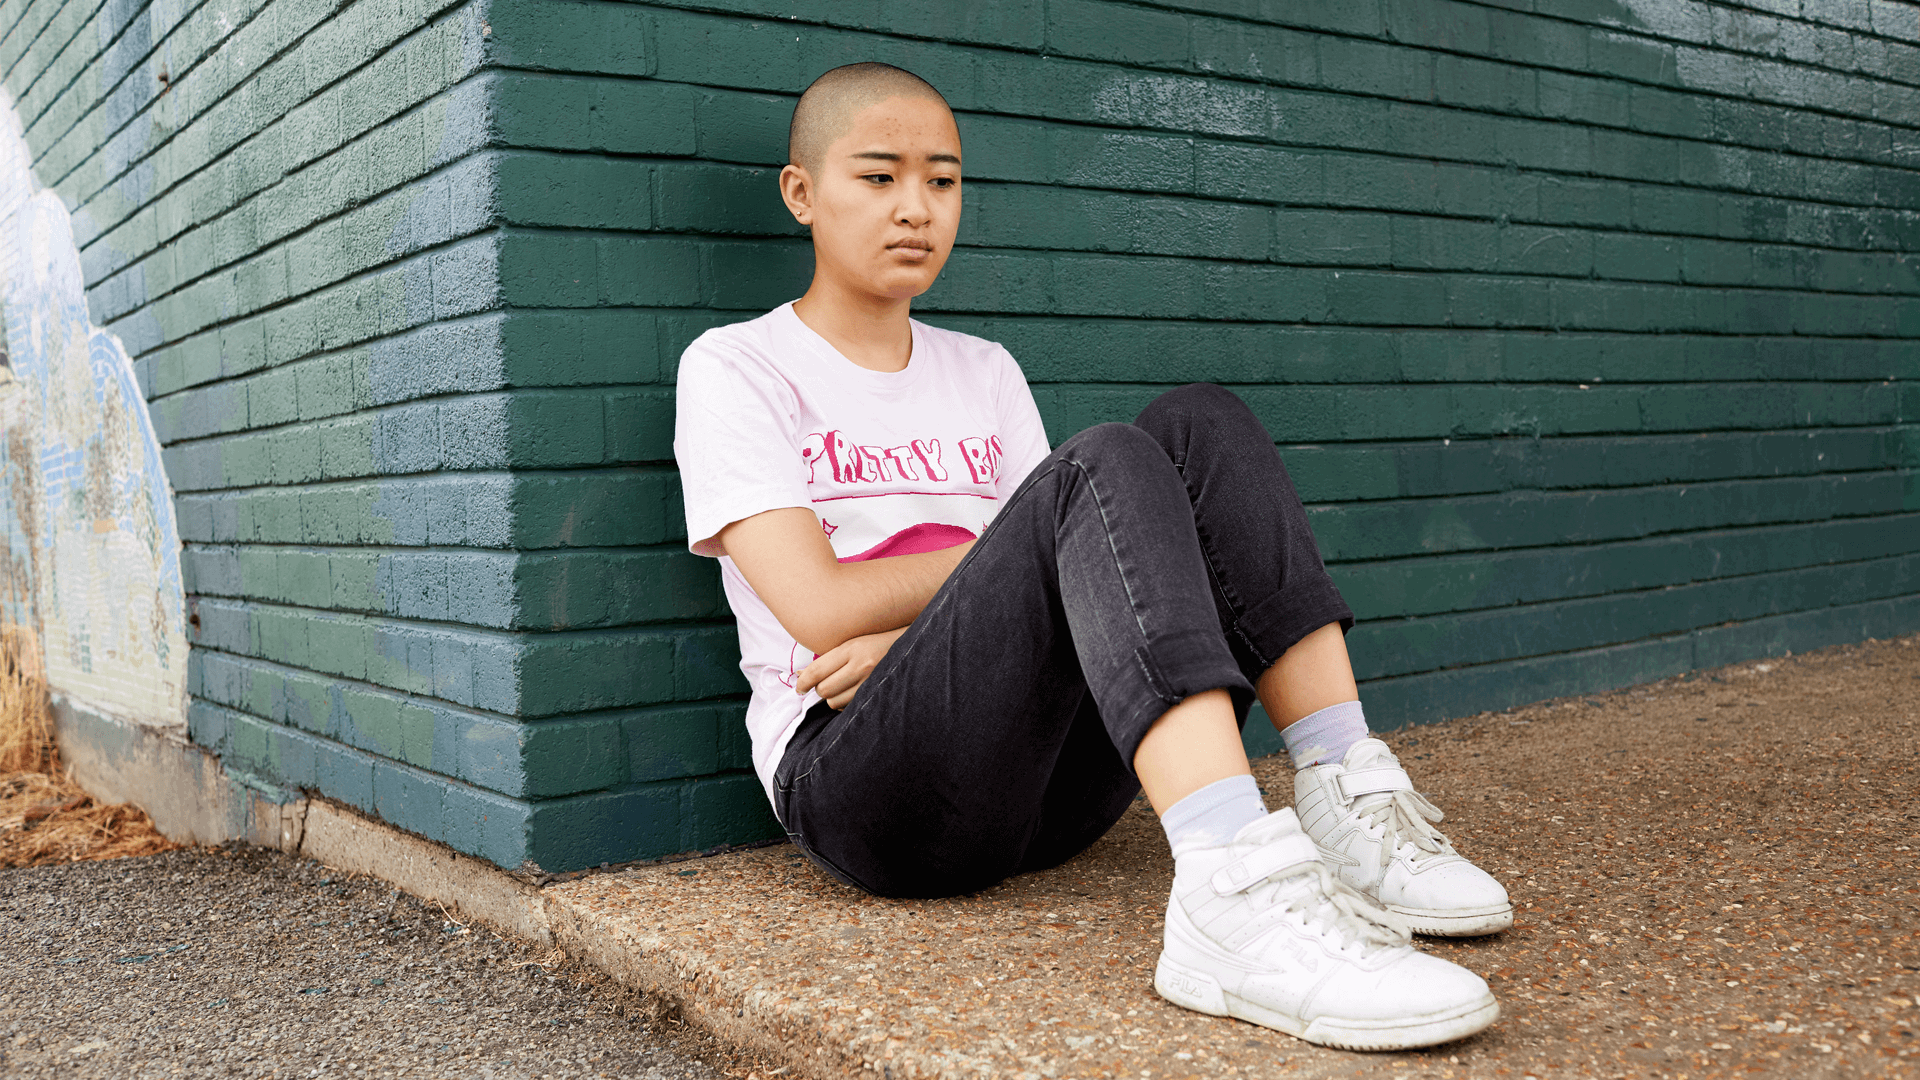 a girl with shaved head wearing with shirt and black trousers looking on the ground thinking while she lean on a green brick wall